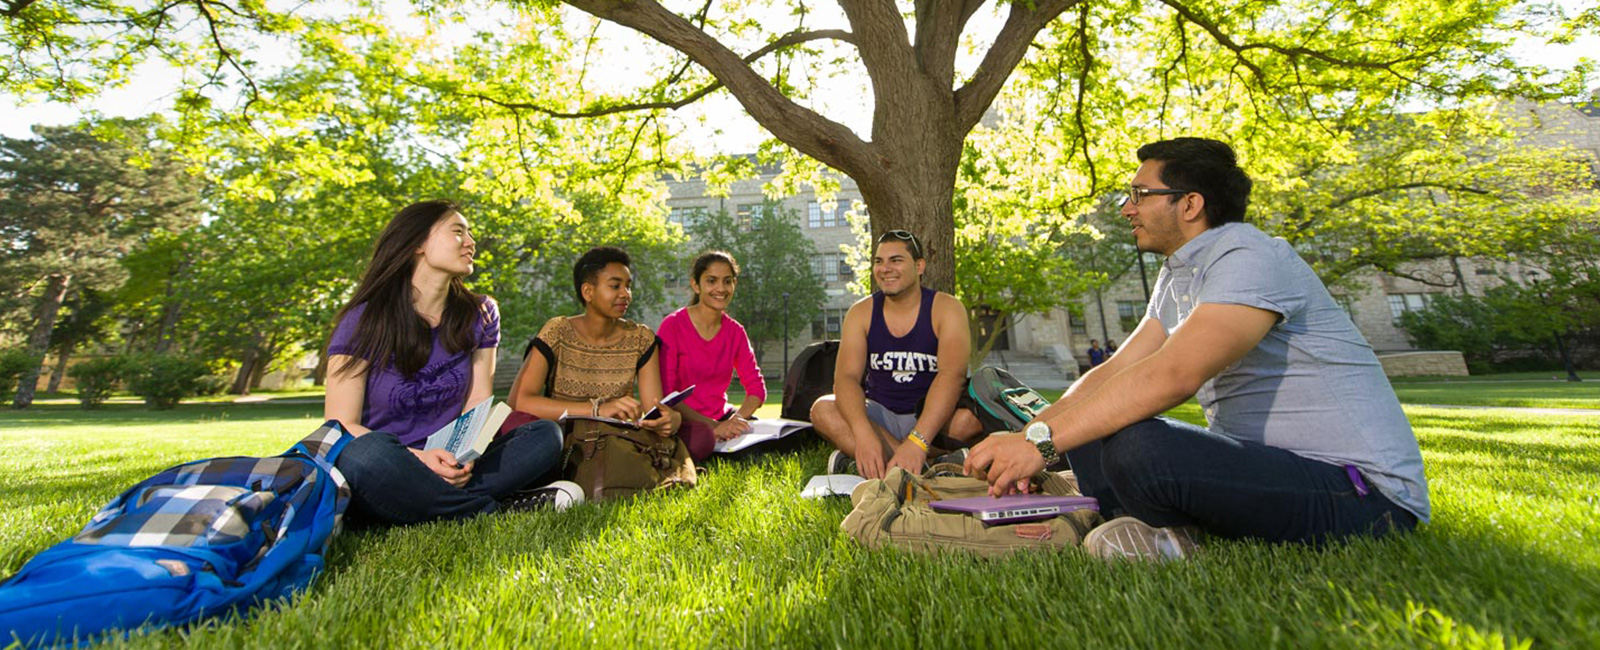 Students meeting outside on campus